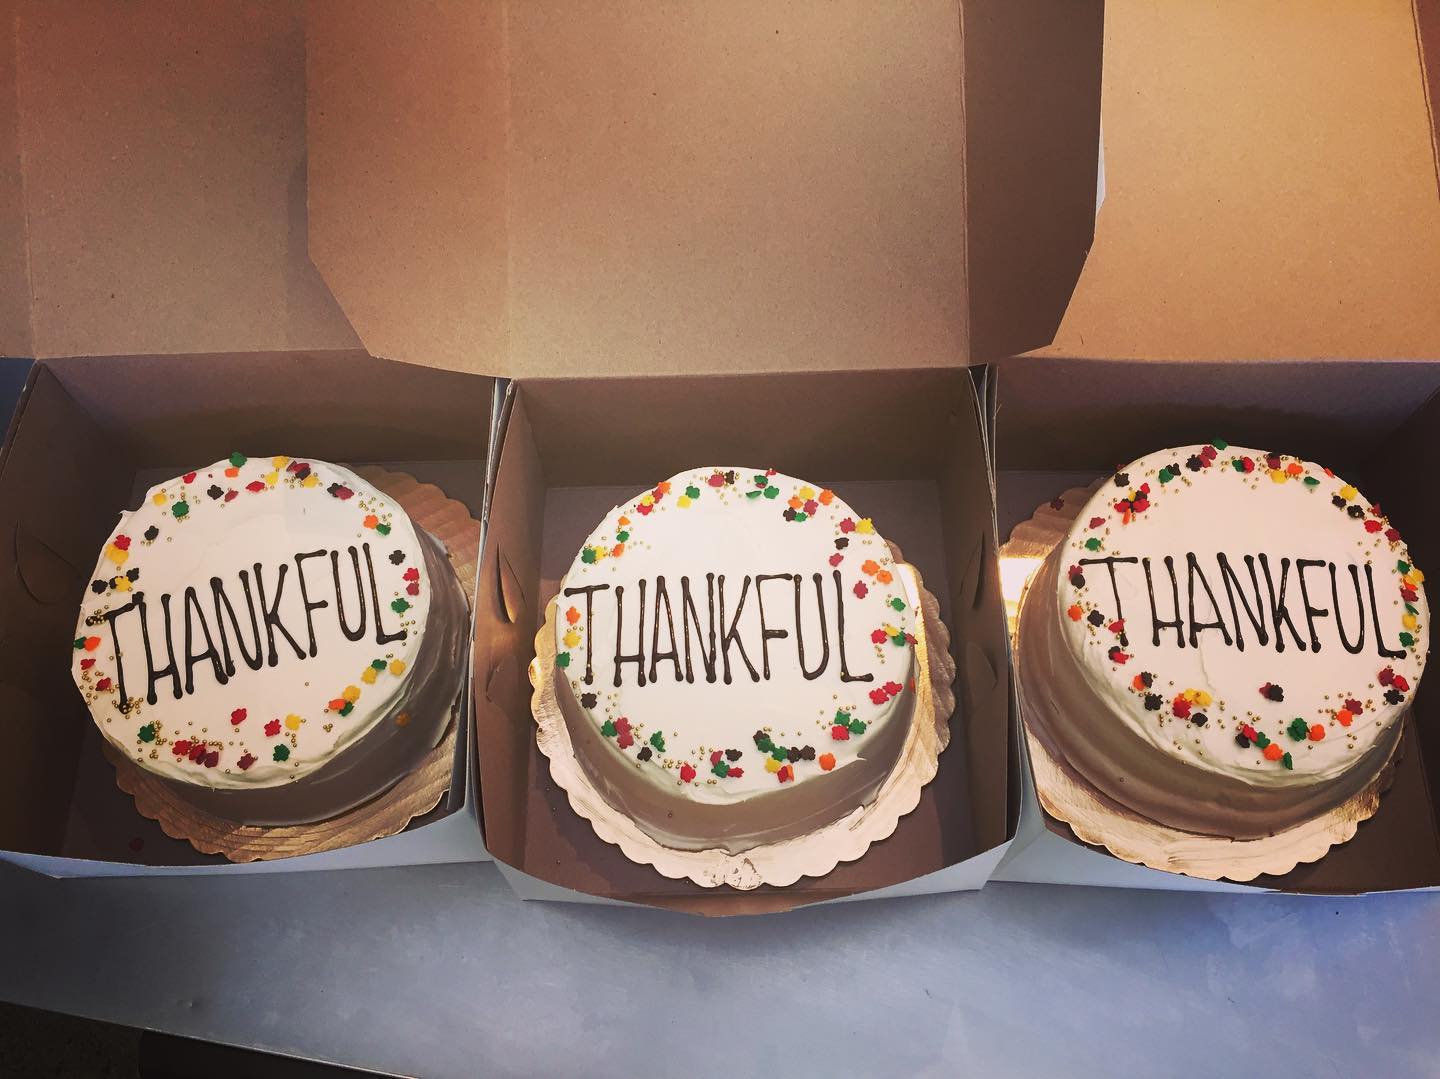 Gratitude cake for any occasion. 